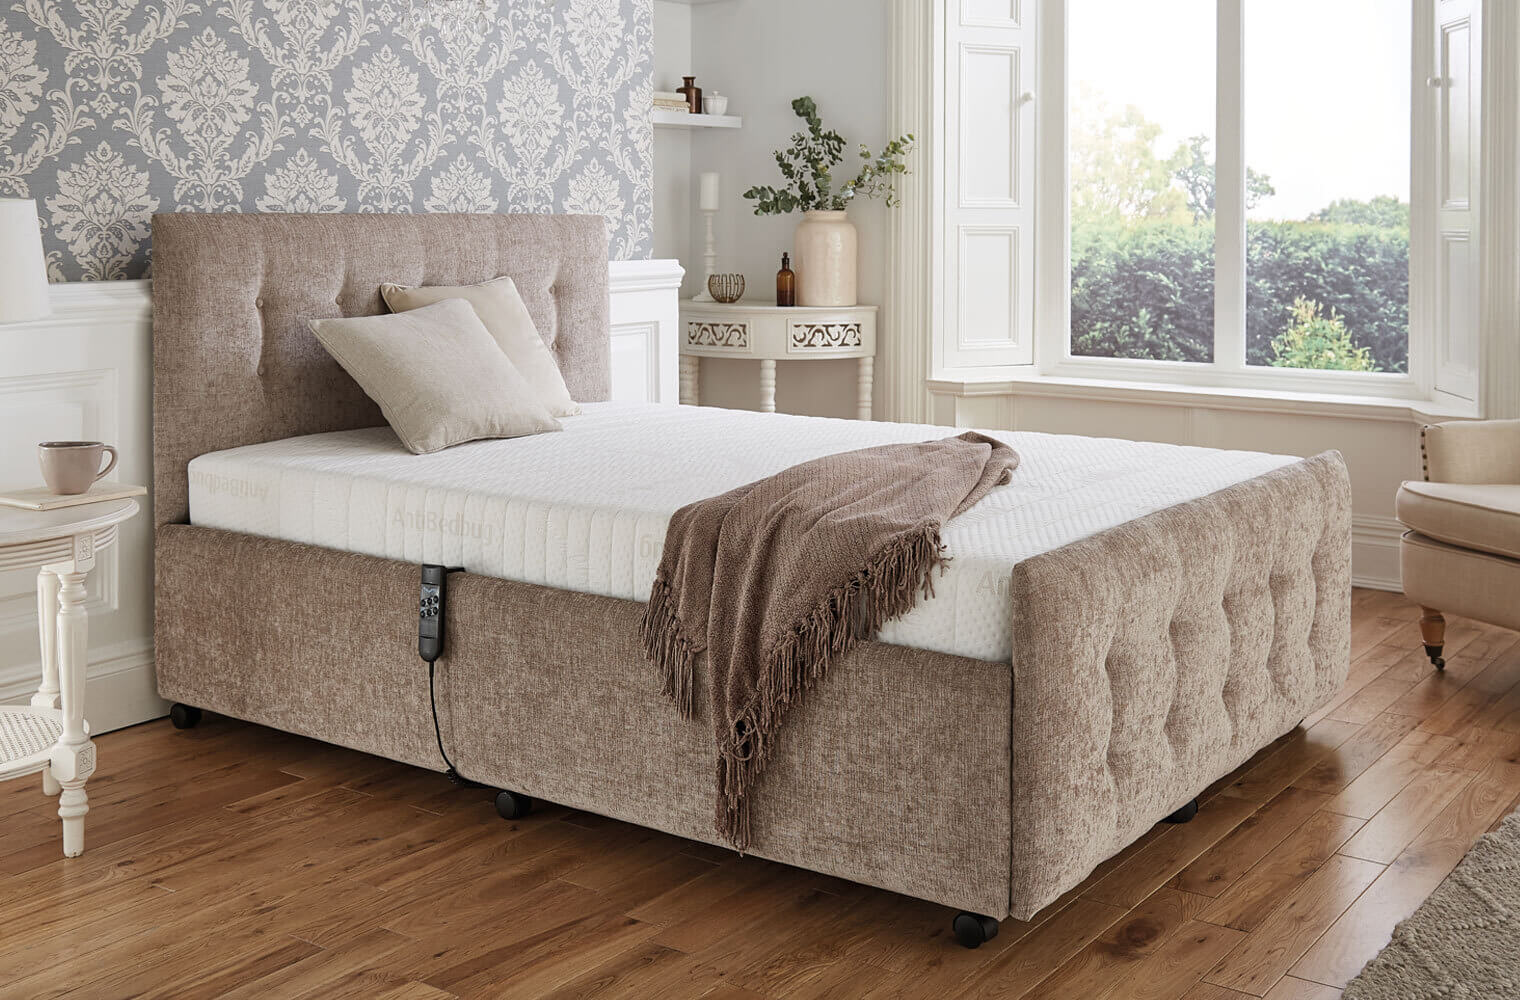 An image of Middletons Chester Luxury Fully Adjustable Automatic Bed with Remote Control Dua...